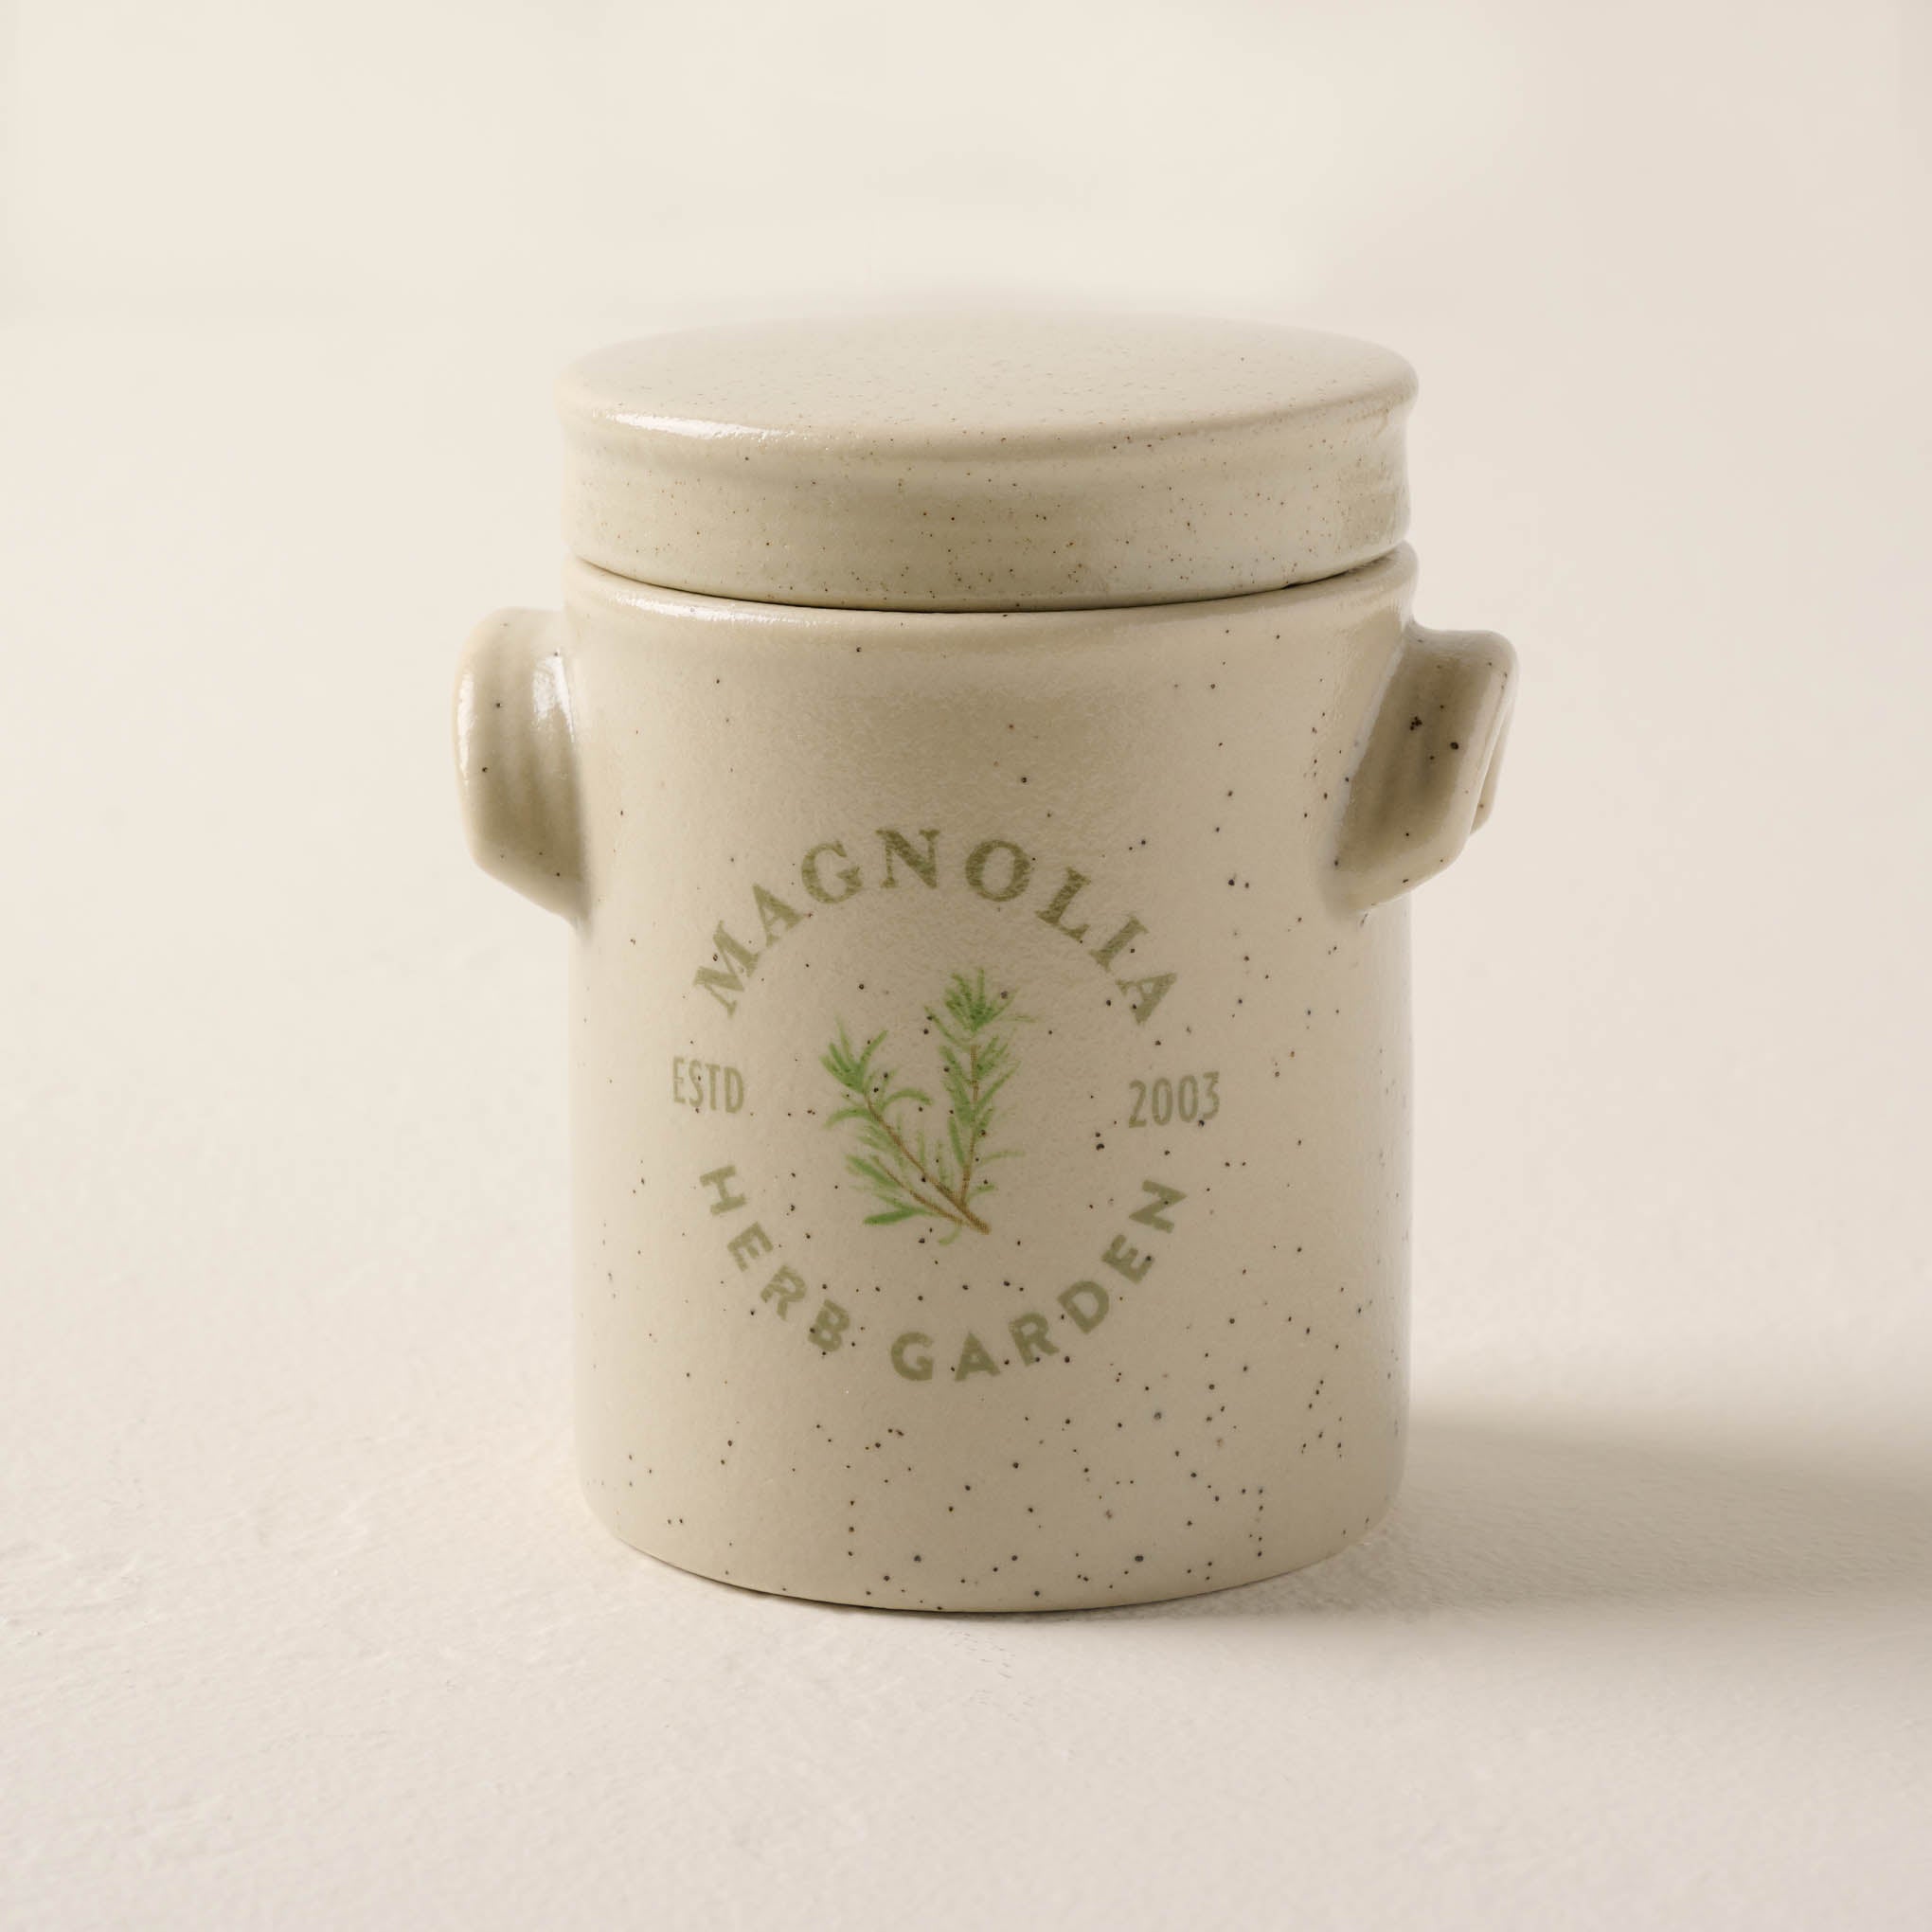 herb garden scented magnolia candle $24.00